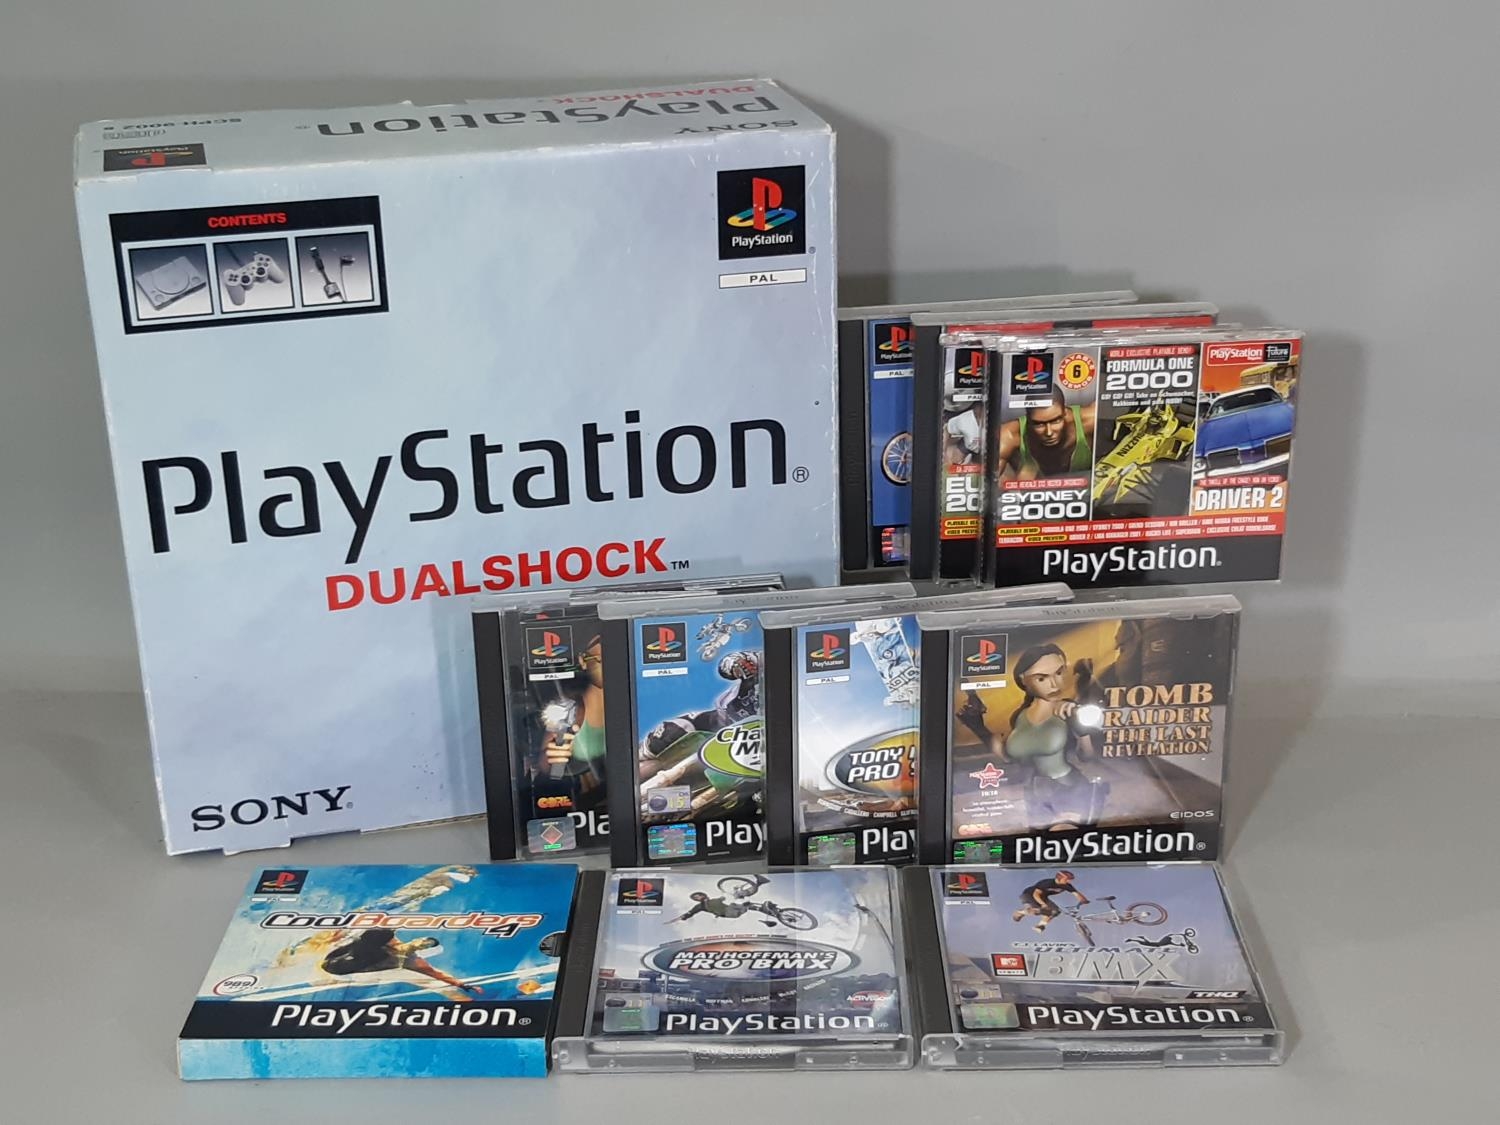 Sony PlayStation Dual Shock (SCPH-9002B) boxed with cables, consoles, instructions and a range of